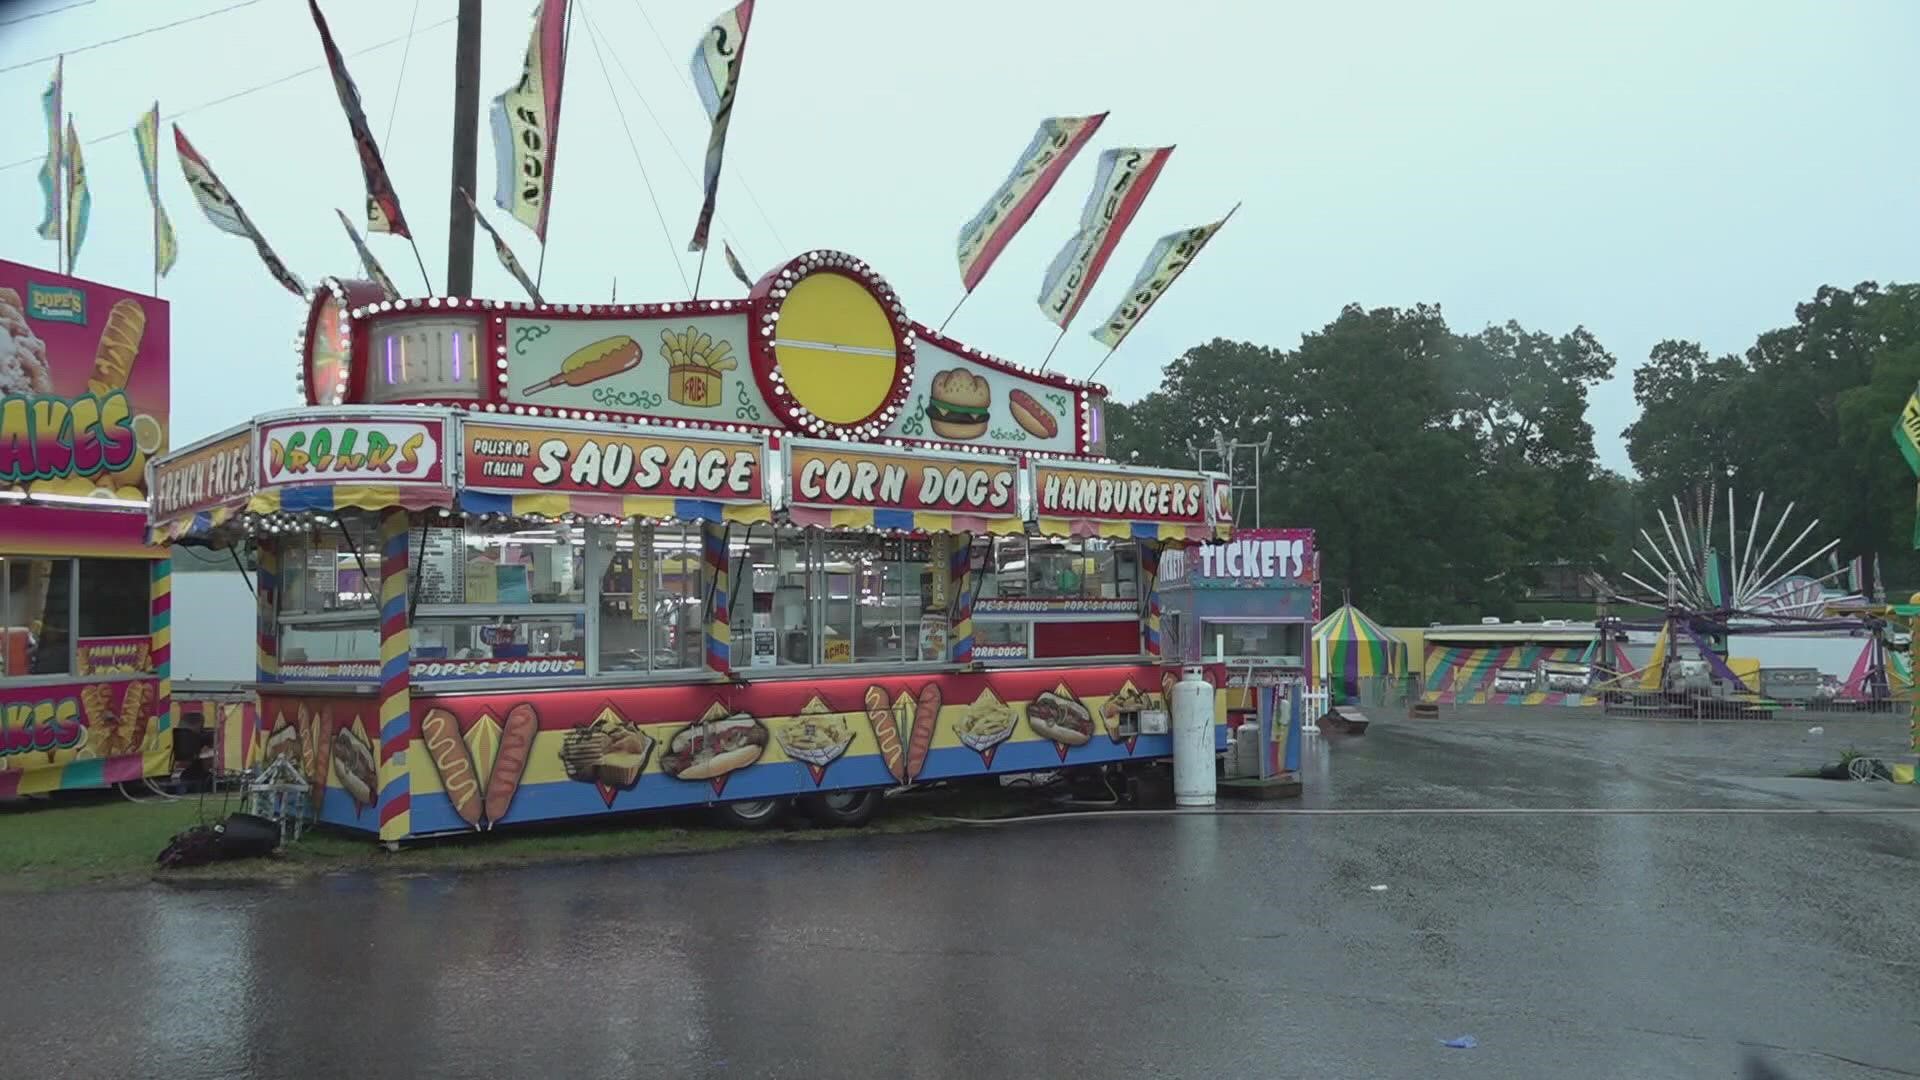 The Anderson County Fair had over $150,000 worth of damage.